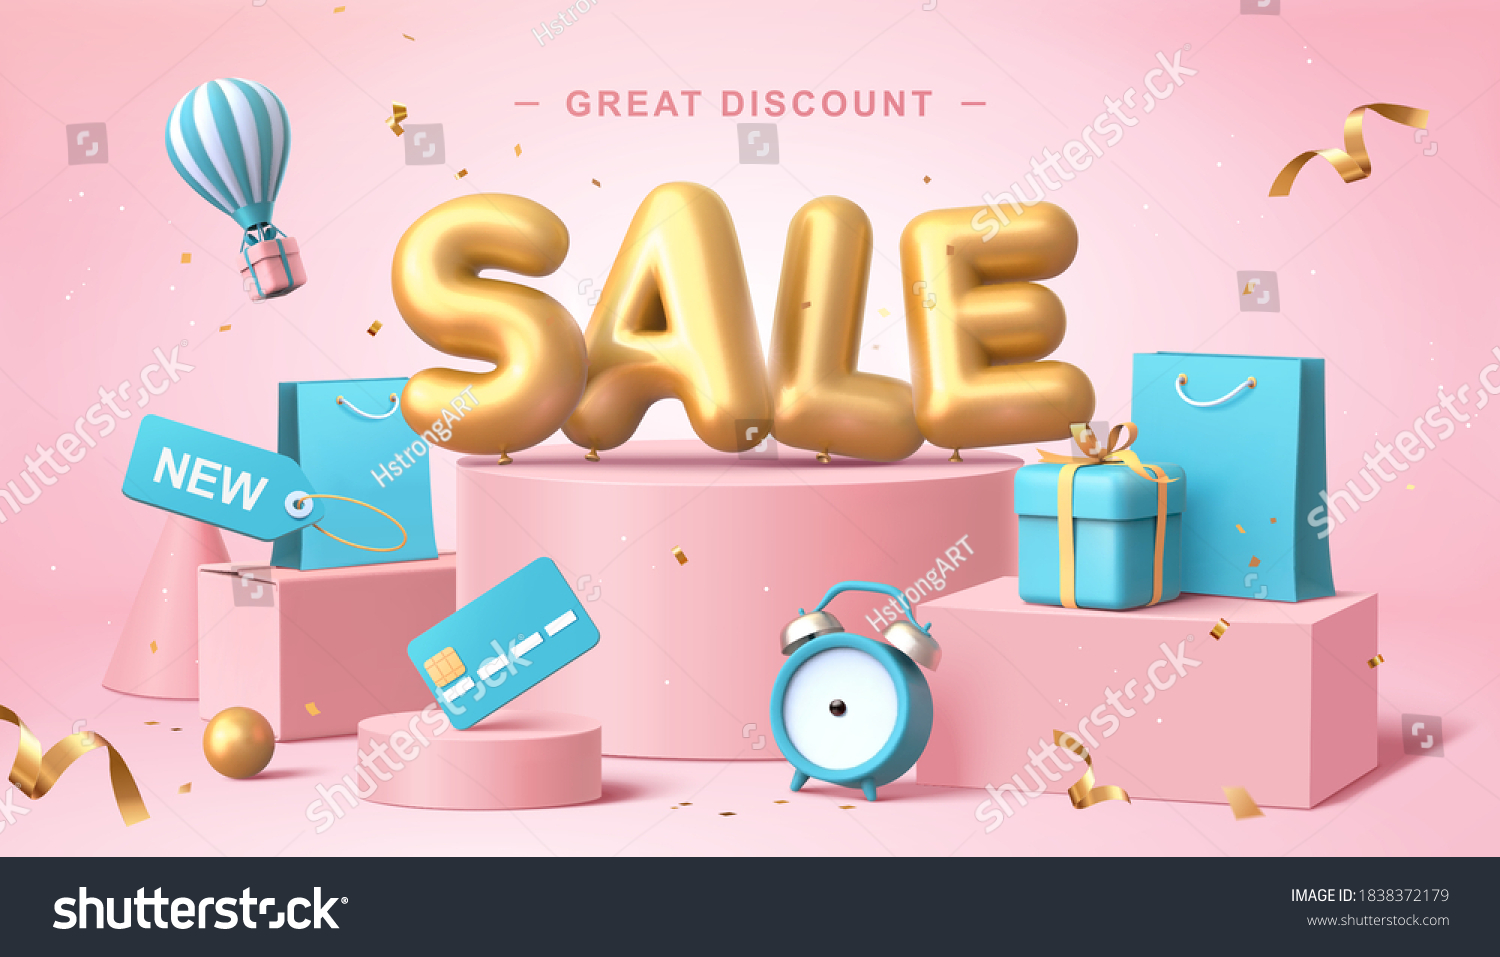 Sale poster in 3d pastel illustration, with cute balloon word on podium with some shopping related elements #1838372179